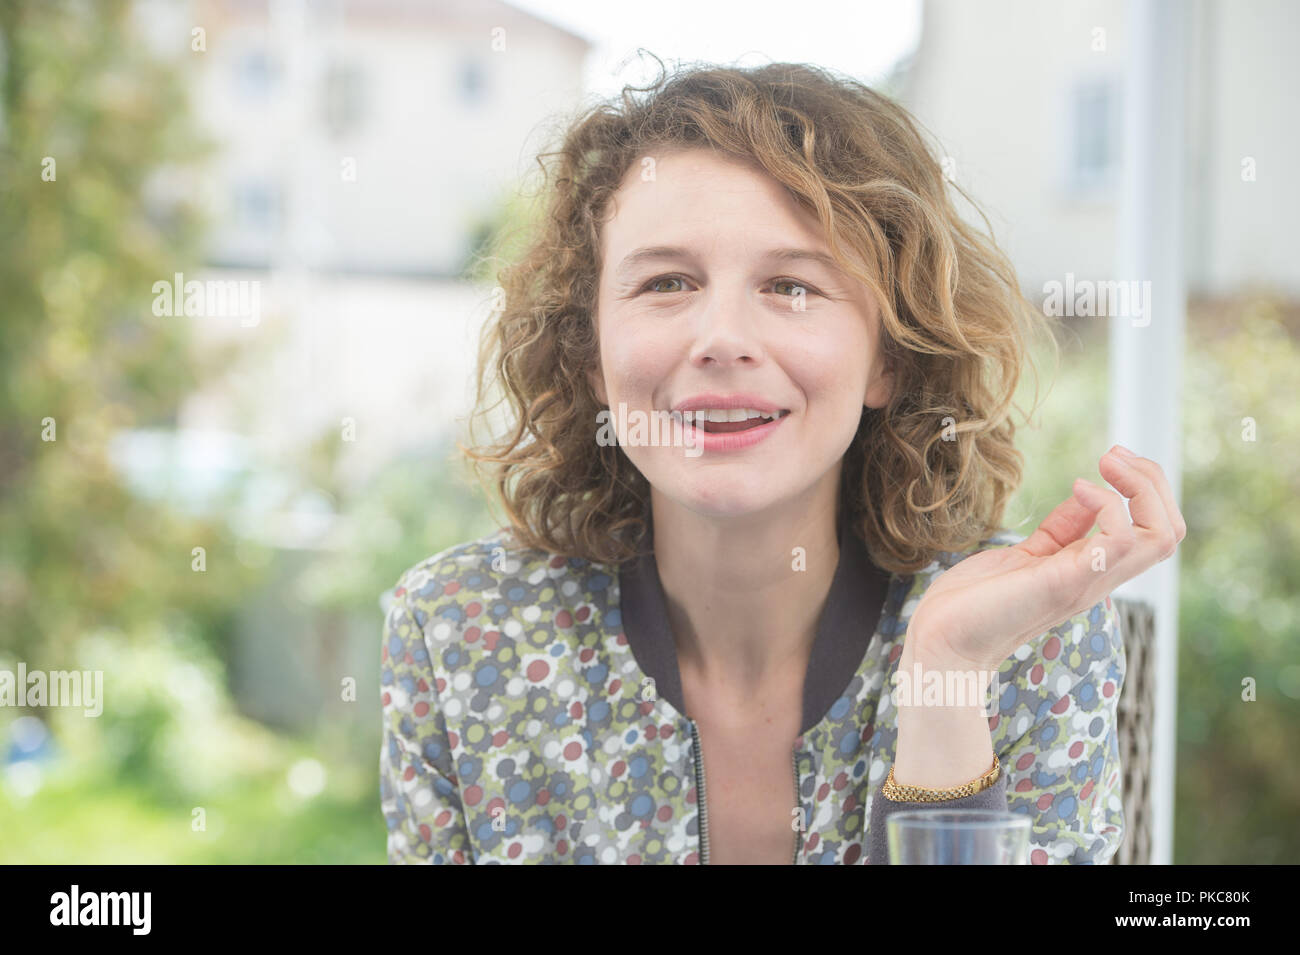 06 September 2018, Lower Saxony, Schwandorf: Actress Anna Maria Sturm gestures during an interview on the feature film "Wackersdorf". Sturm plays the role of her mother, who was then an anti-WAA activist. (on dpa-Korr "Politdrama "Wackersdorf": Resistance against nuclear waste plant" of 13.09.2018) Photo: Timm Schamberger/dpa Stock Photo